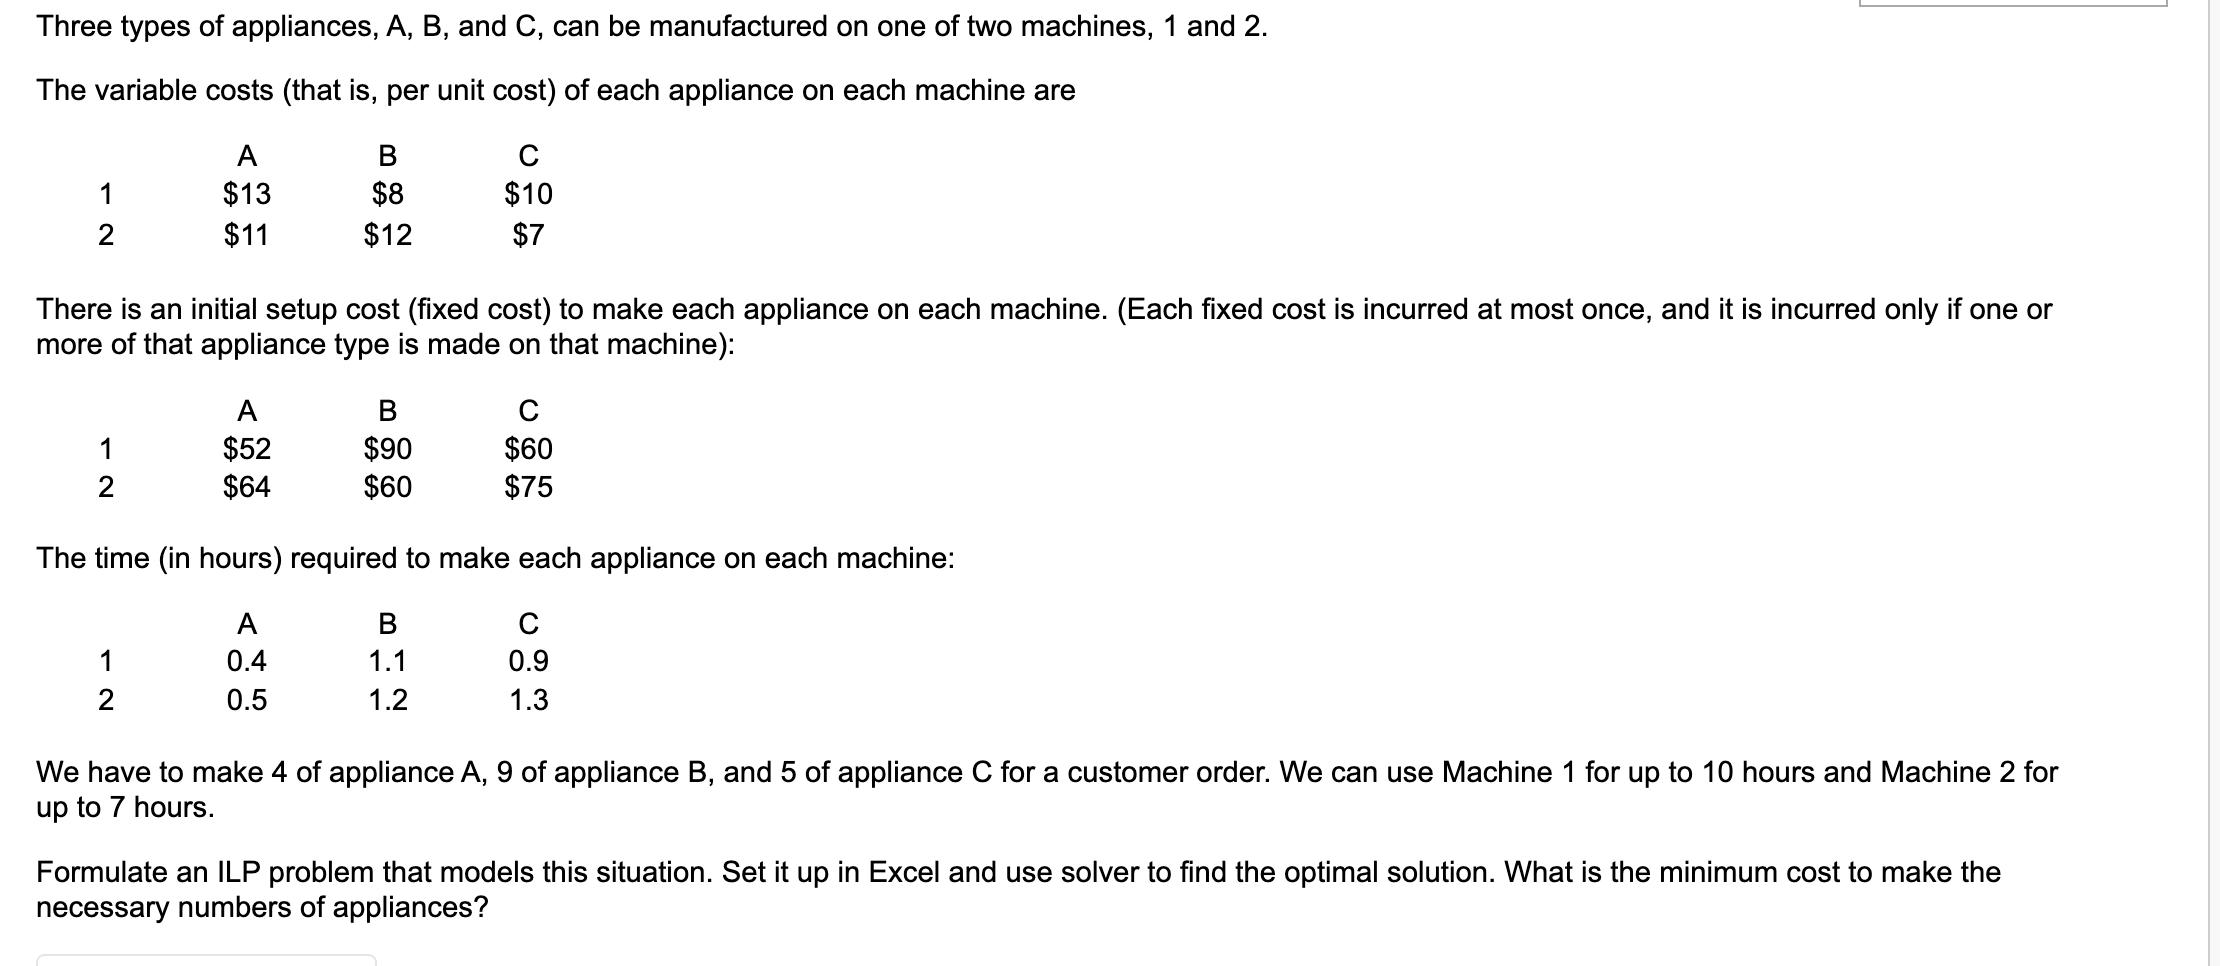 Three types of appliances, A, B, and C, can be manufactured on one of two machines, 1 and 2. The variable